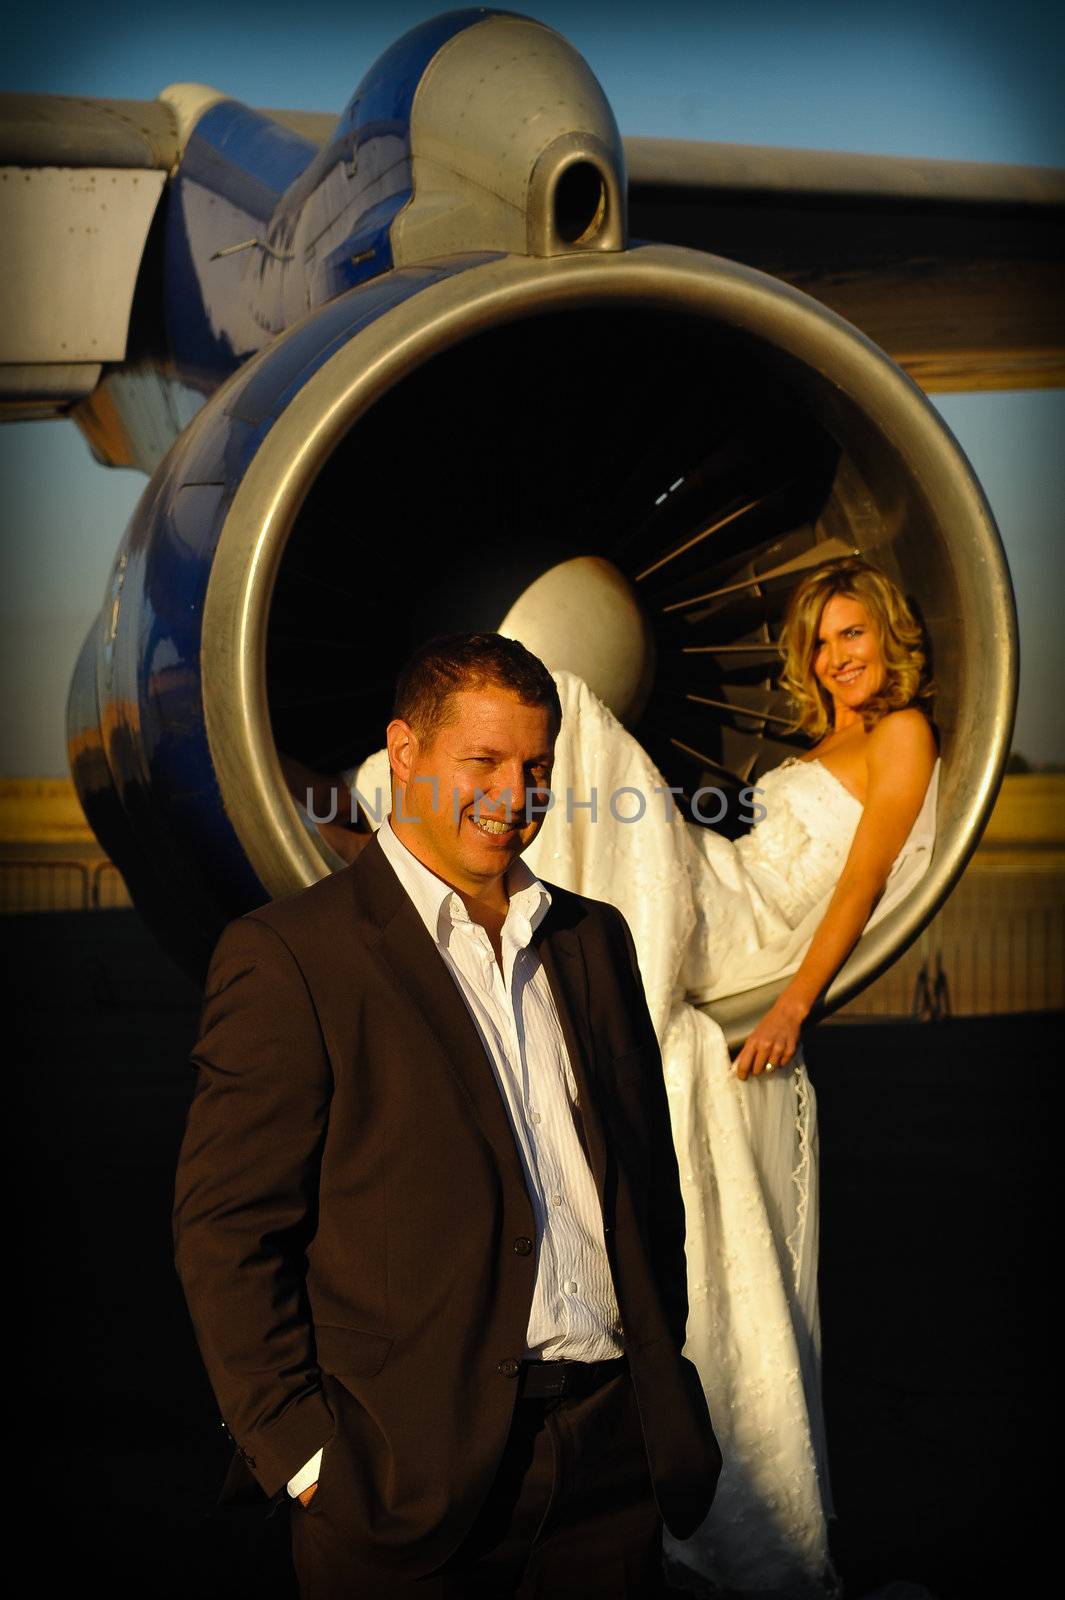 sexy young adult wedding couple laying inside the engine intake of Boeing passenger aircraft with groom infront